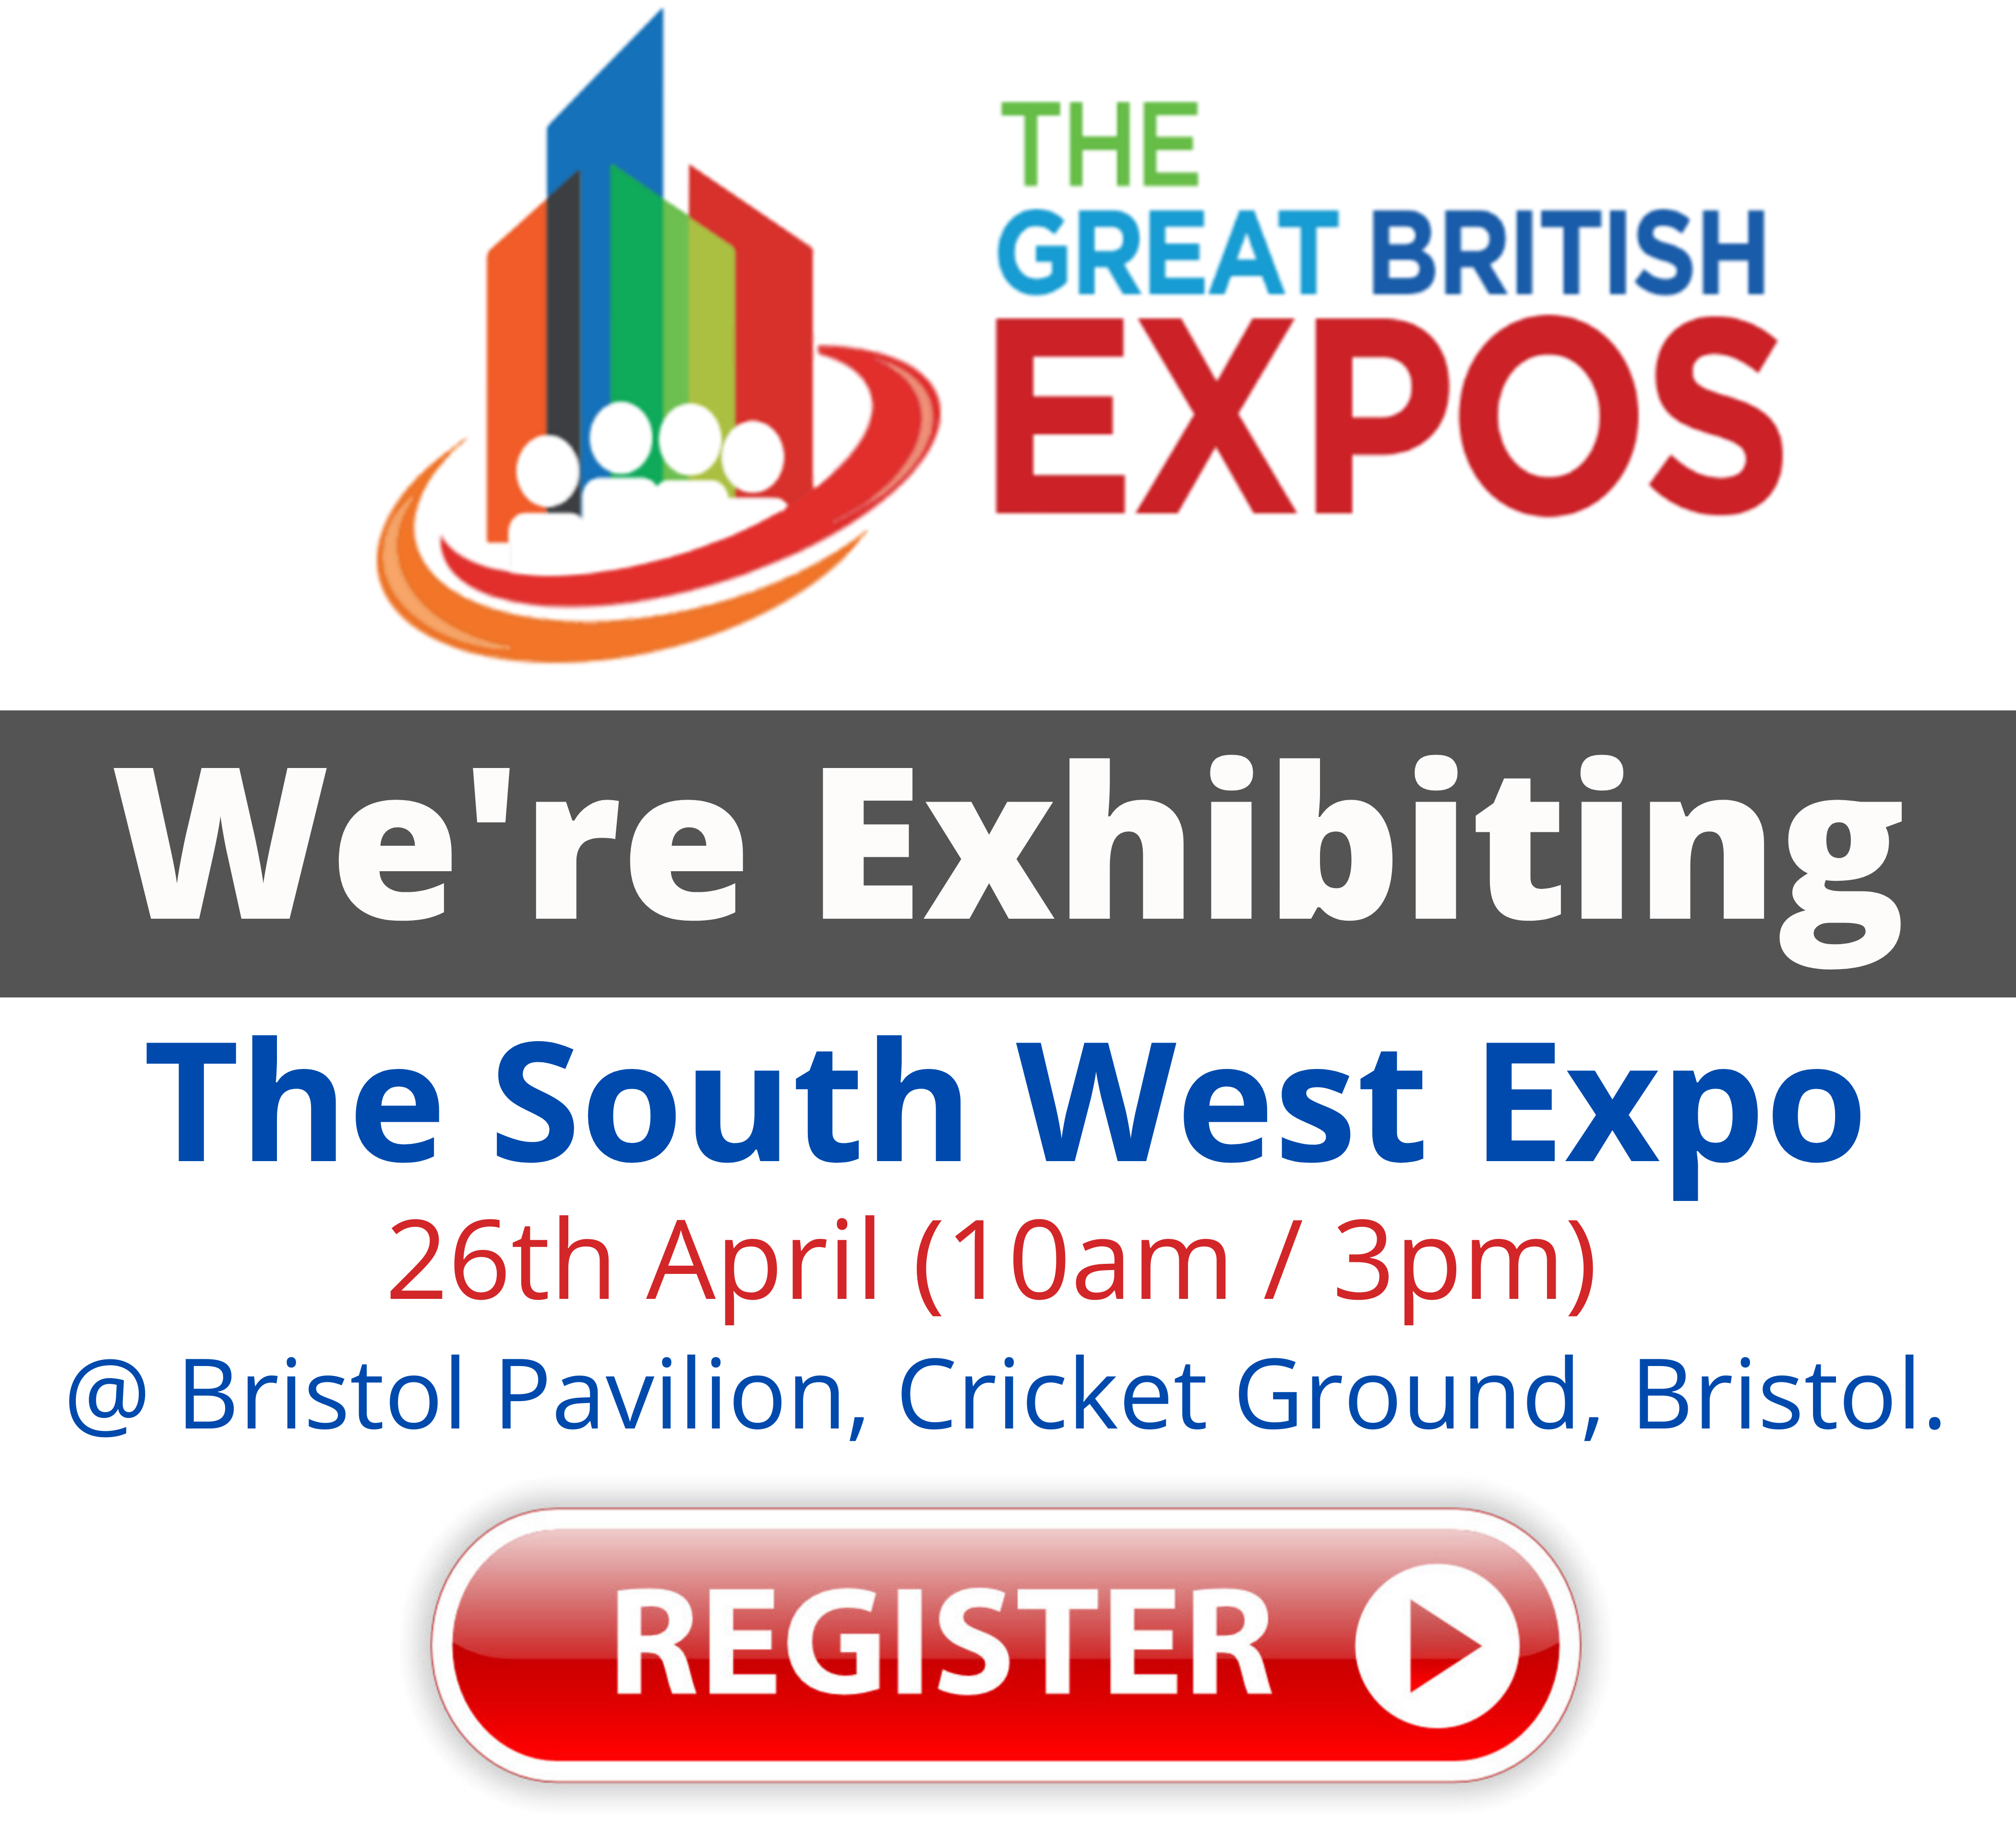 SOUTH WEST EXPO RETURNS TO BRISTOL!